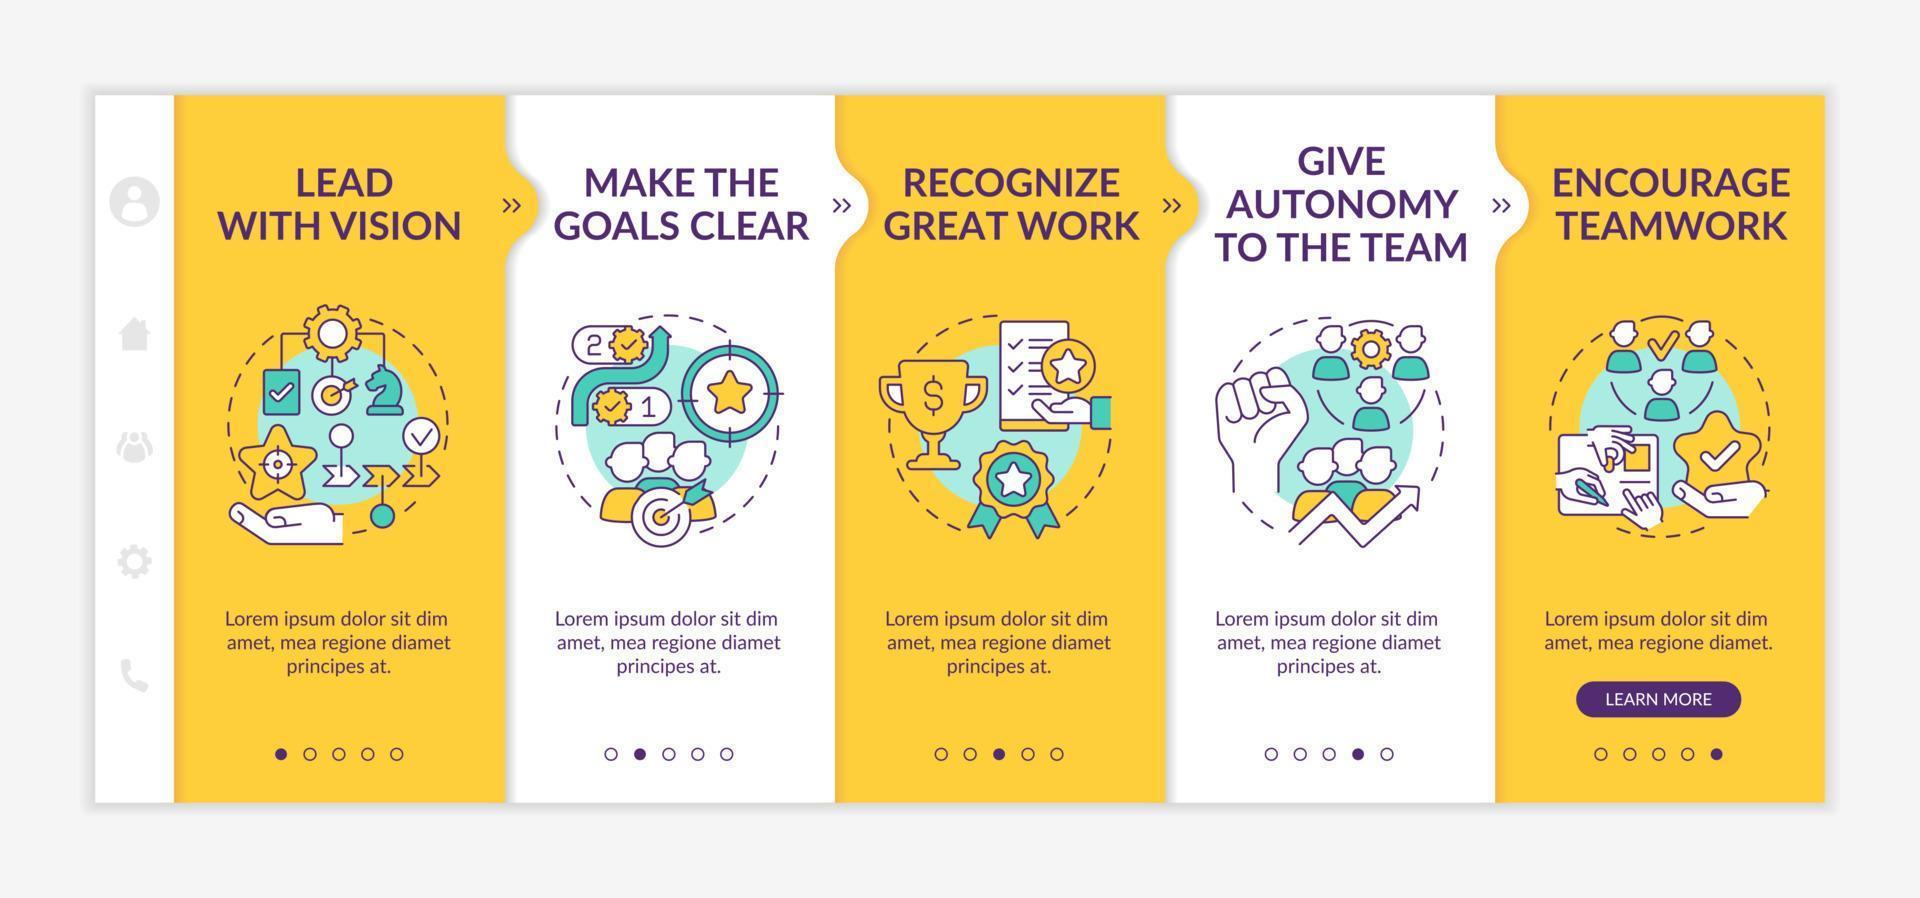 Improving employee motivation yellow onboarding template. Encourage teamwork. Responsive mobile website with linear concept icons. Web page walkthrough 5 step screens. vector